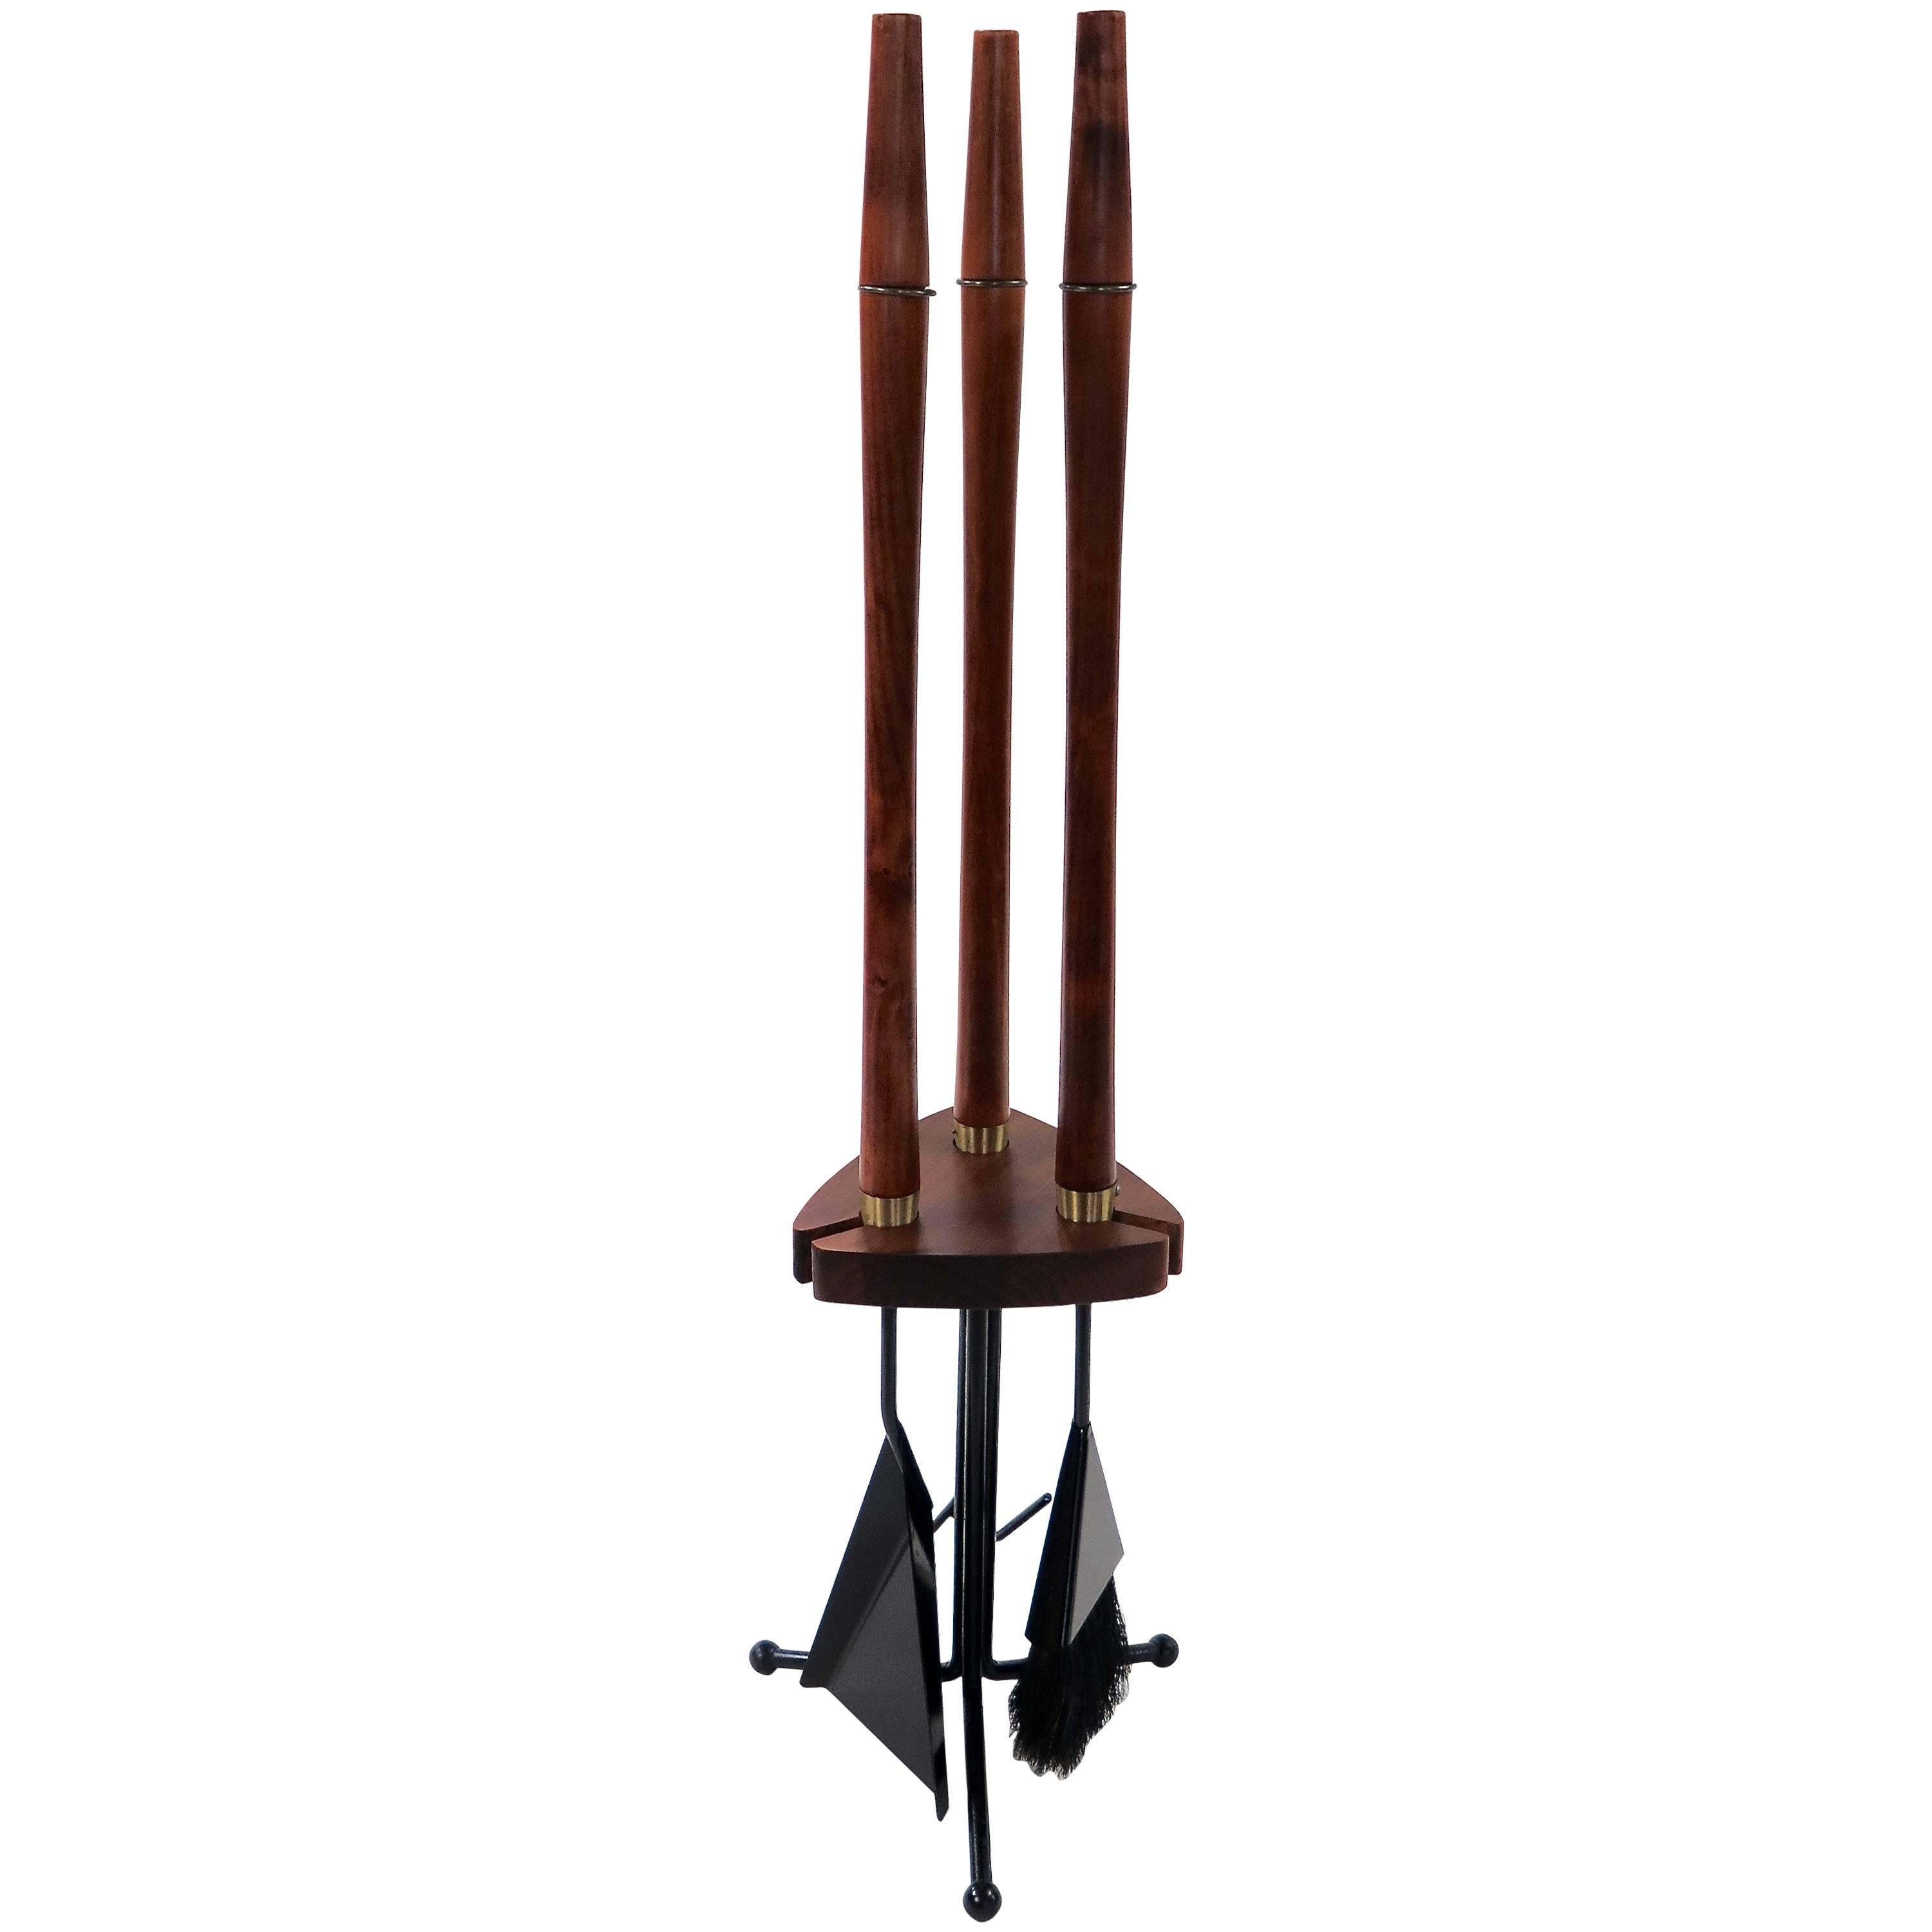 1950 Modern Fireplace Tool Set with Long Handles